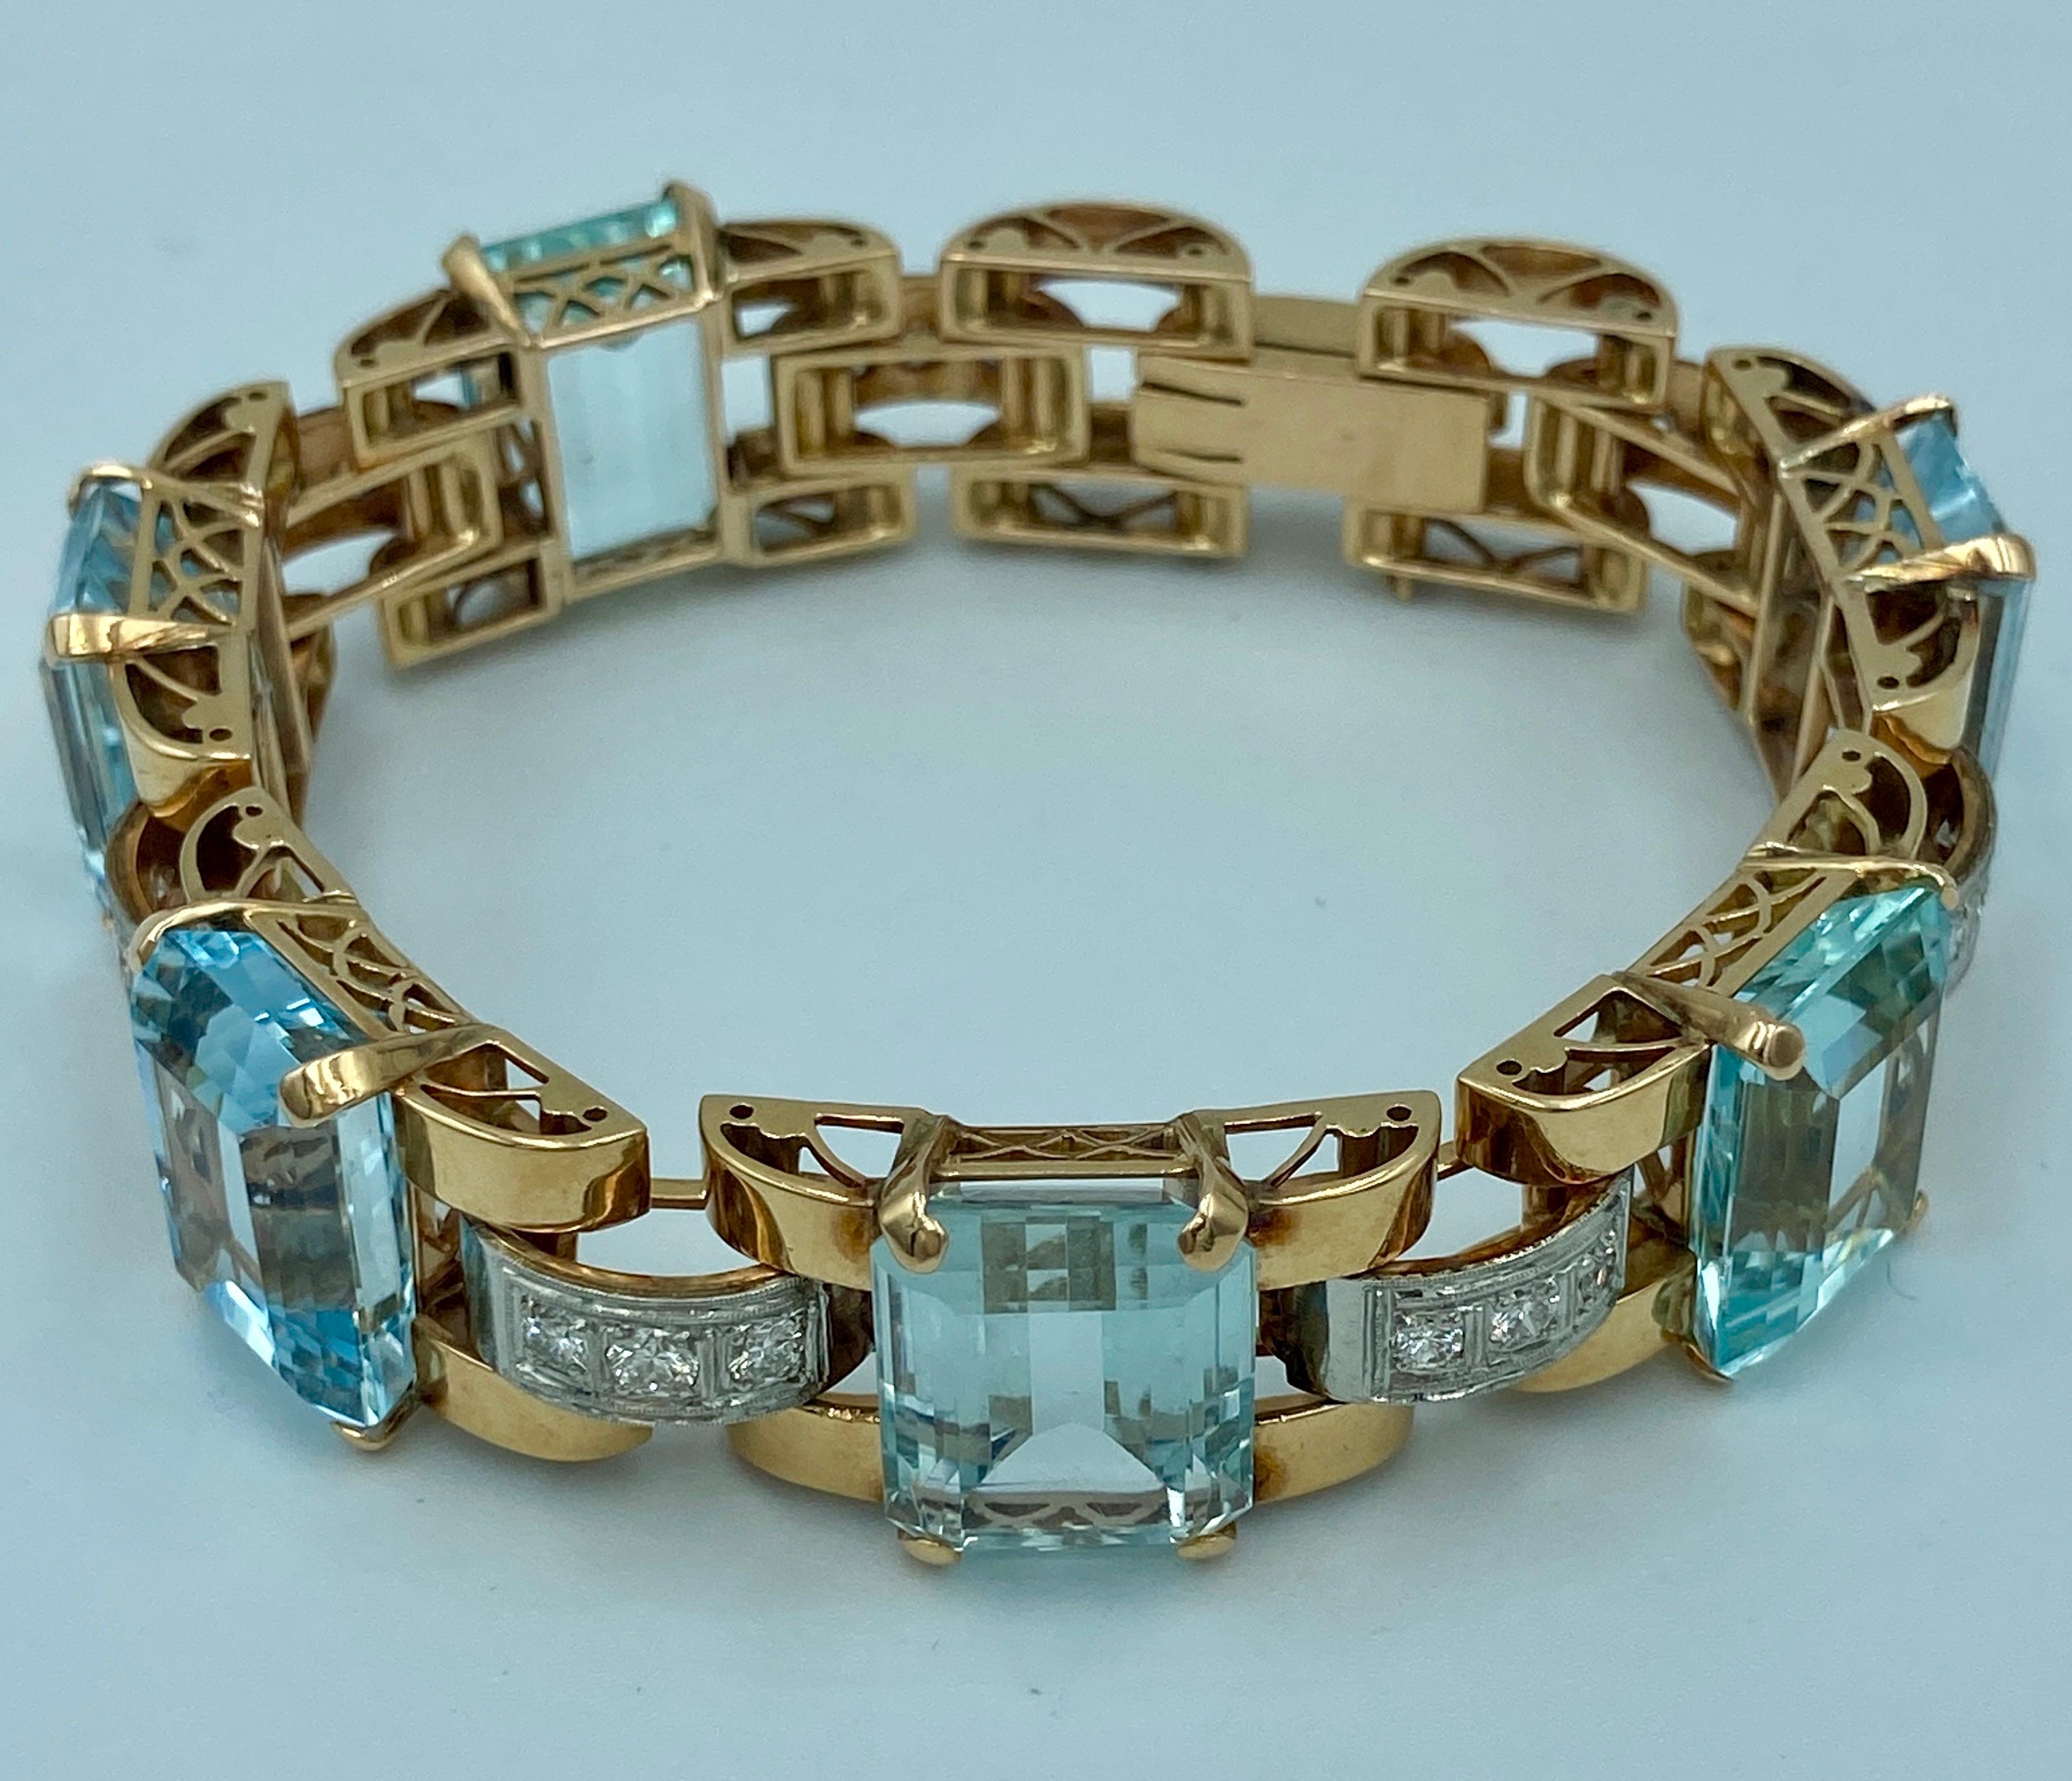 This exquisite bracelet made of 18 carat gold, consists of 6 aquamarines of 8 carats each and of approximately 1 carat of single cut diamonds. It is French made from 1950s.

Although it is sold separately, the bracelet is a part of a set which